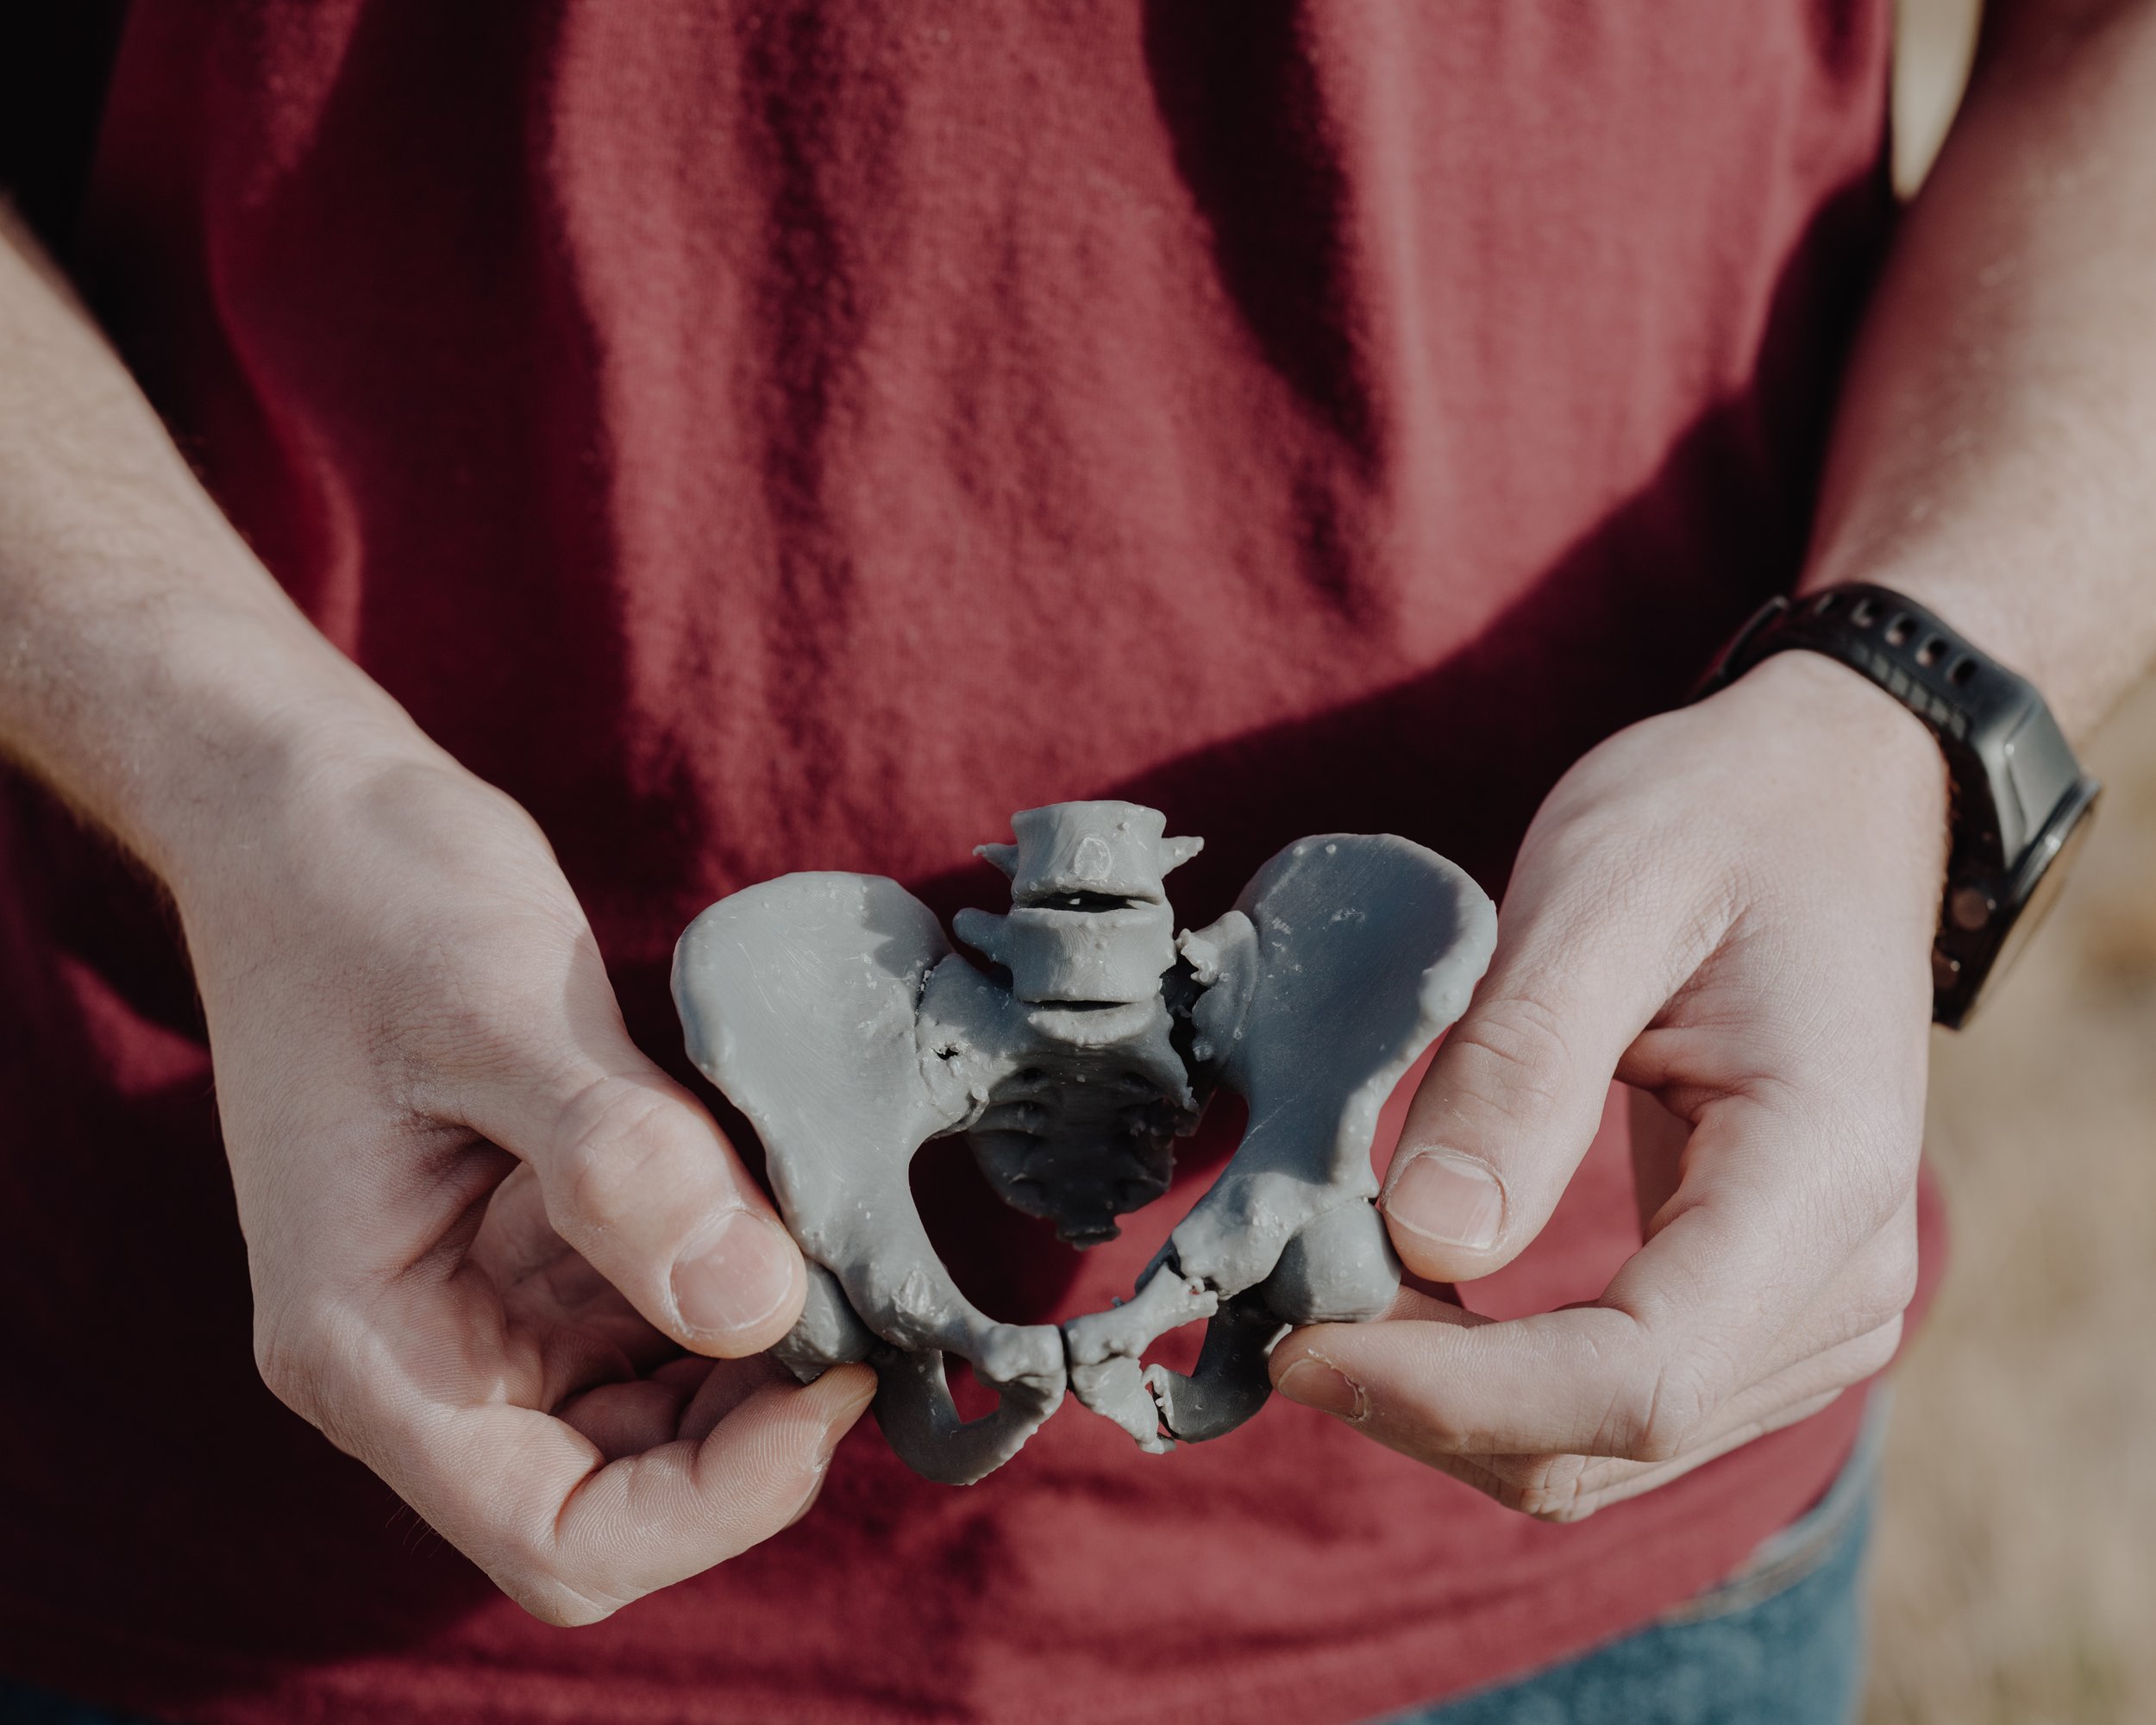  Smokejumper Jackson Spooner holding a 3D printed model of his pelvis fracture - photographed for  BuzzFeed News  